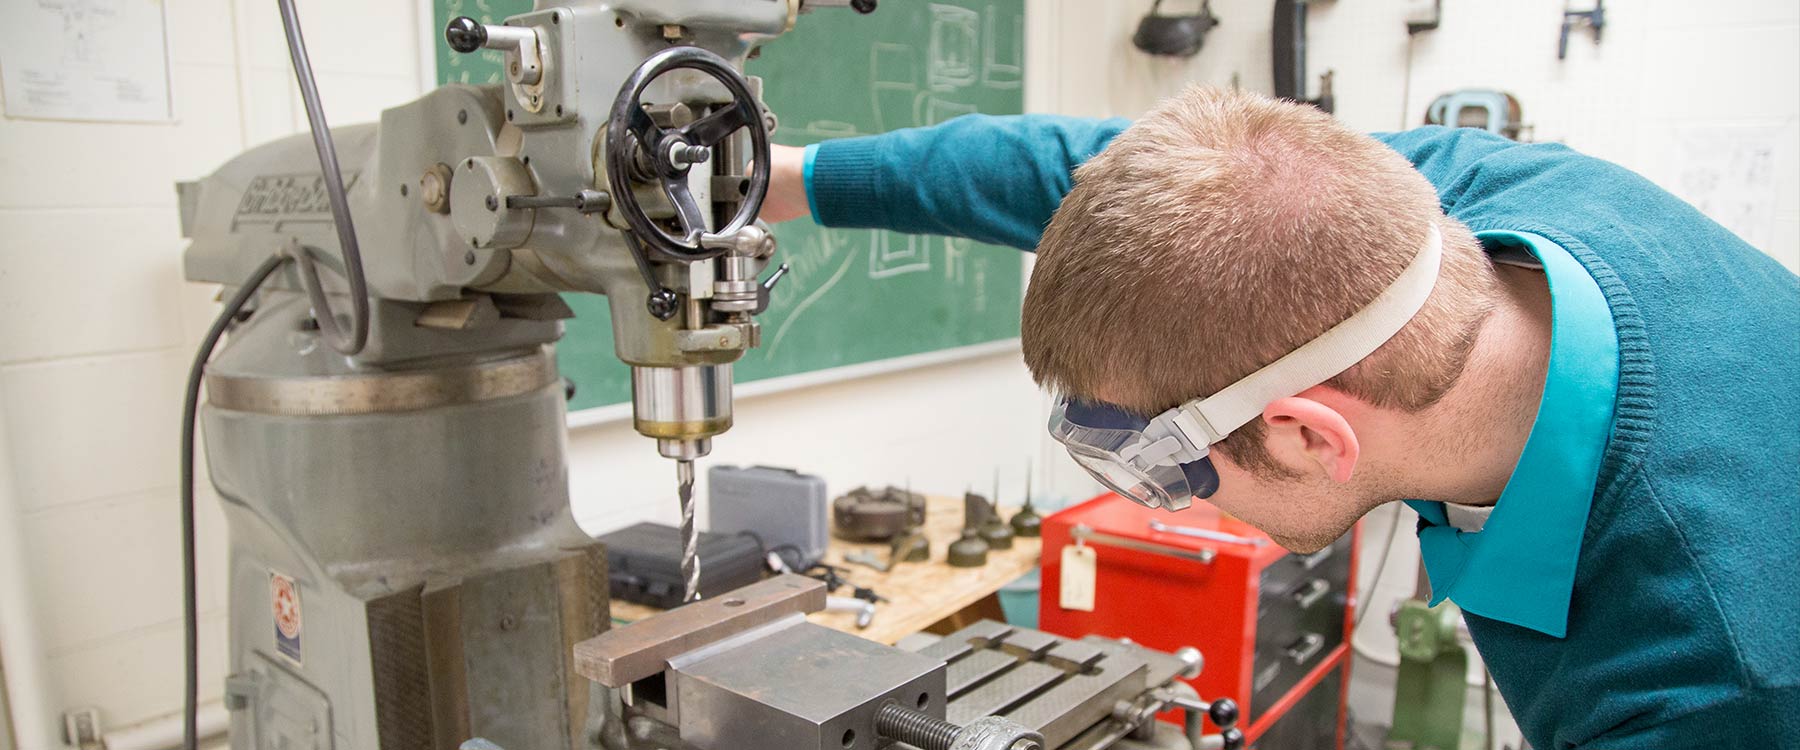 A physics student, wearing lab goggles, watches closely as he uses a drill press in a physics lab.